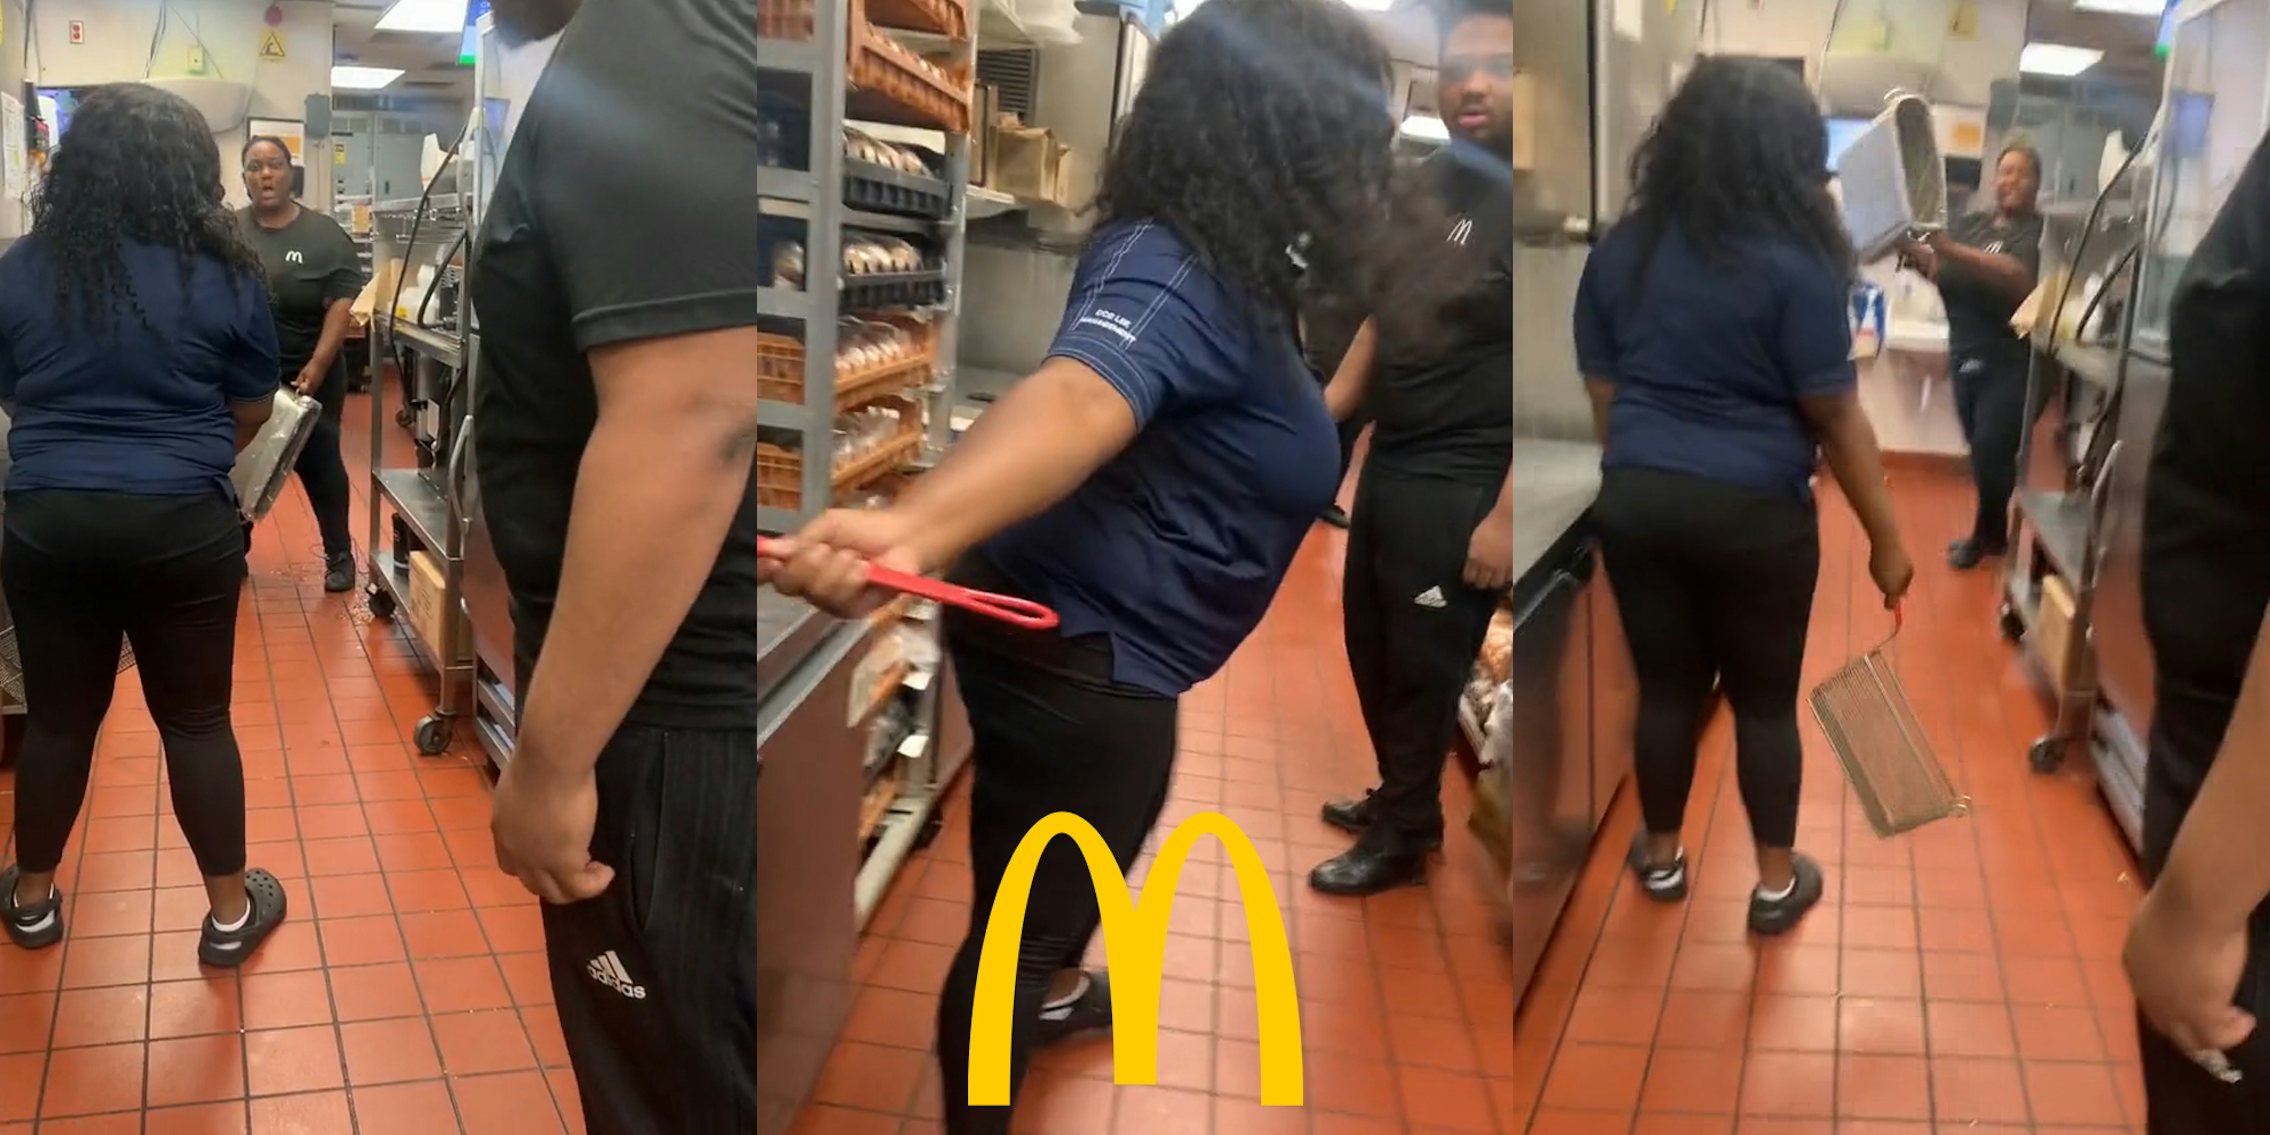 McDonald's workers holding equipment while fighting in kitchen (l) McDonald's worker grabbing equipment while fighting in kitchen with McDonald's golden arches 'm' logo at bottom (c) McDonald's workers holding equipment while fighting in kitchen (r)